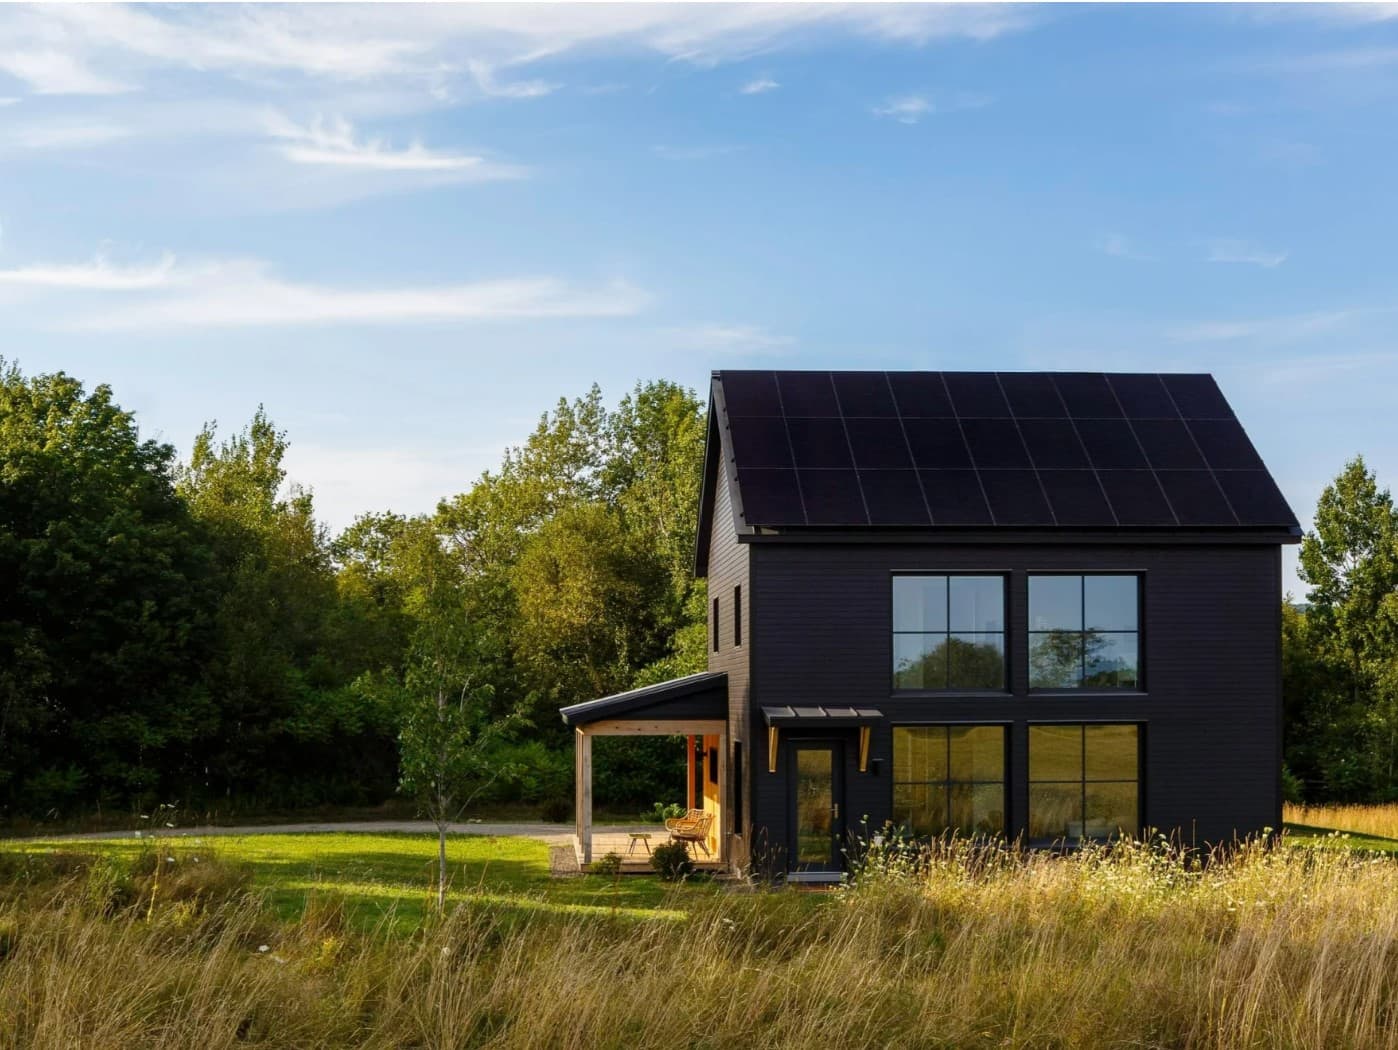 A passive house in the town of Hope designed by GO Logic. (Courtesy Of GO Logic)